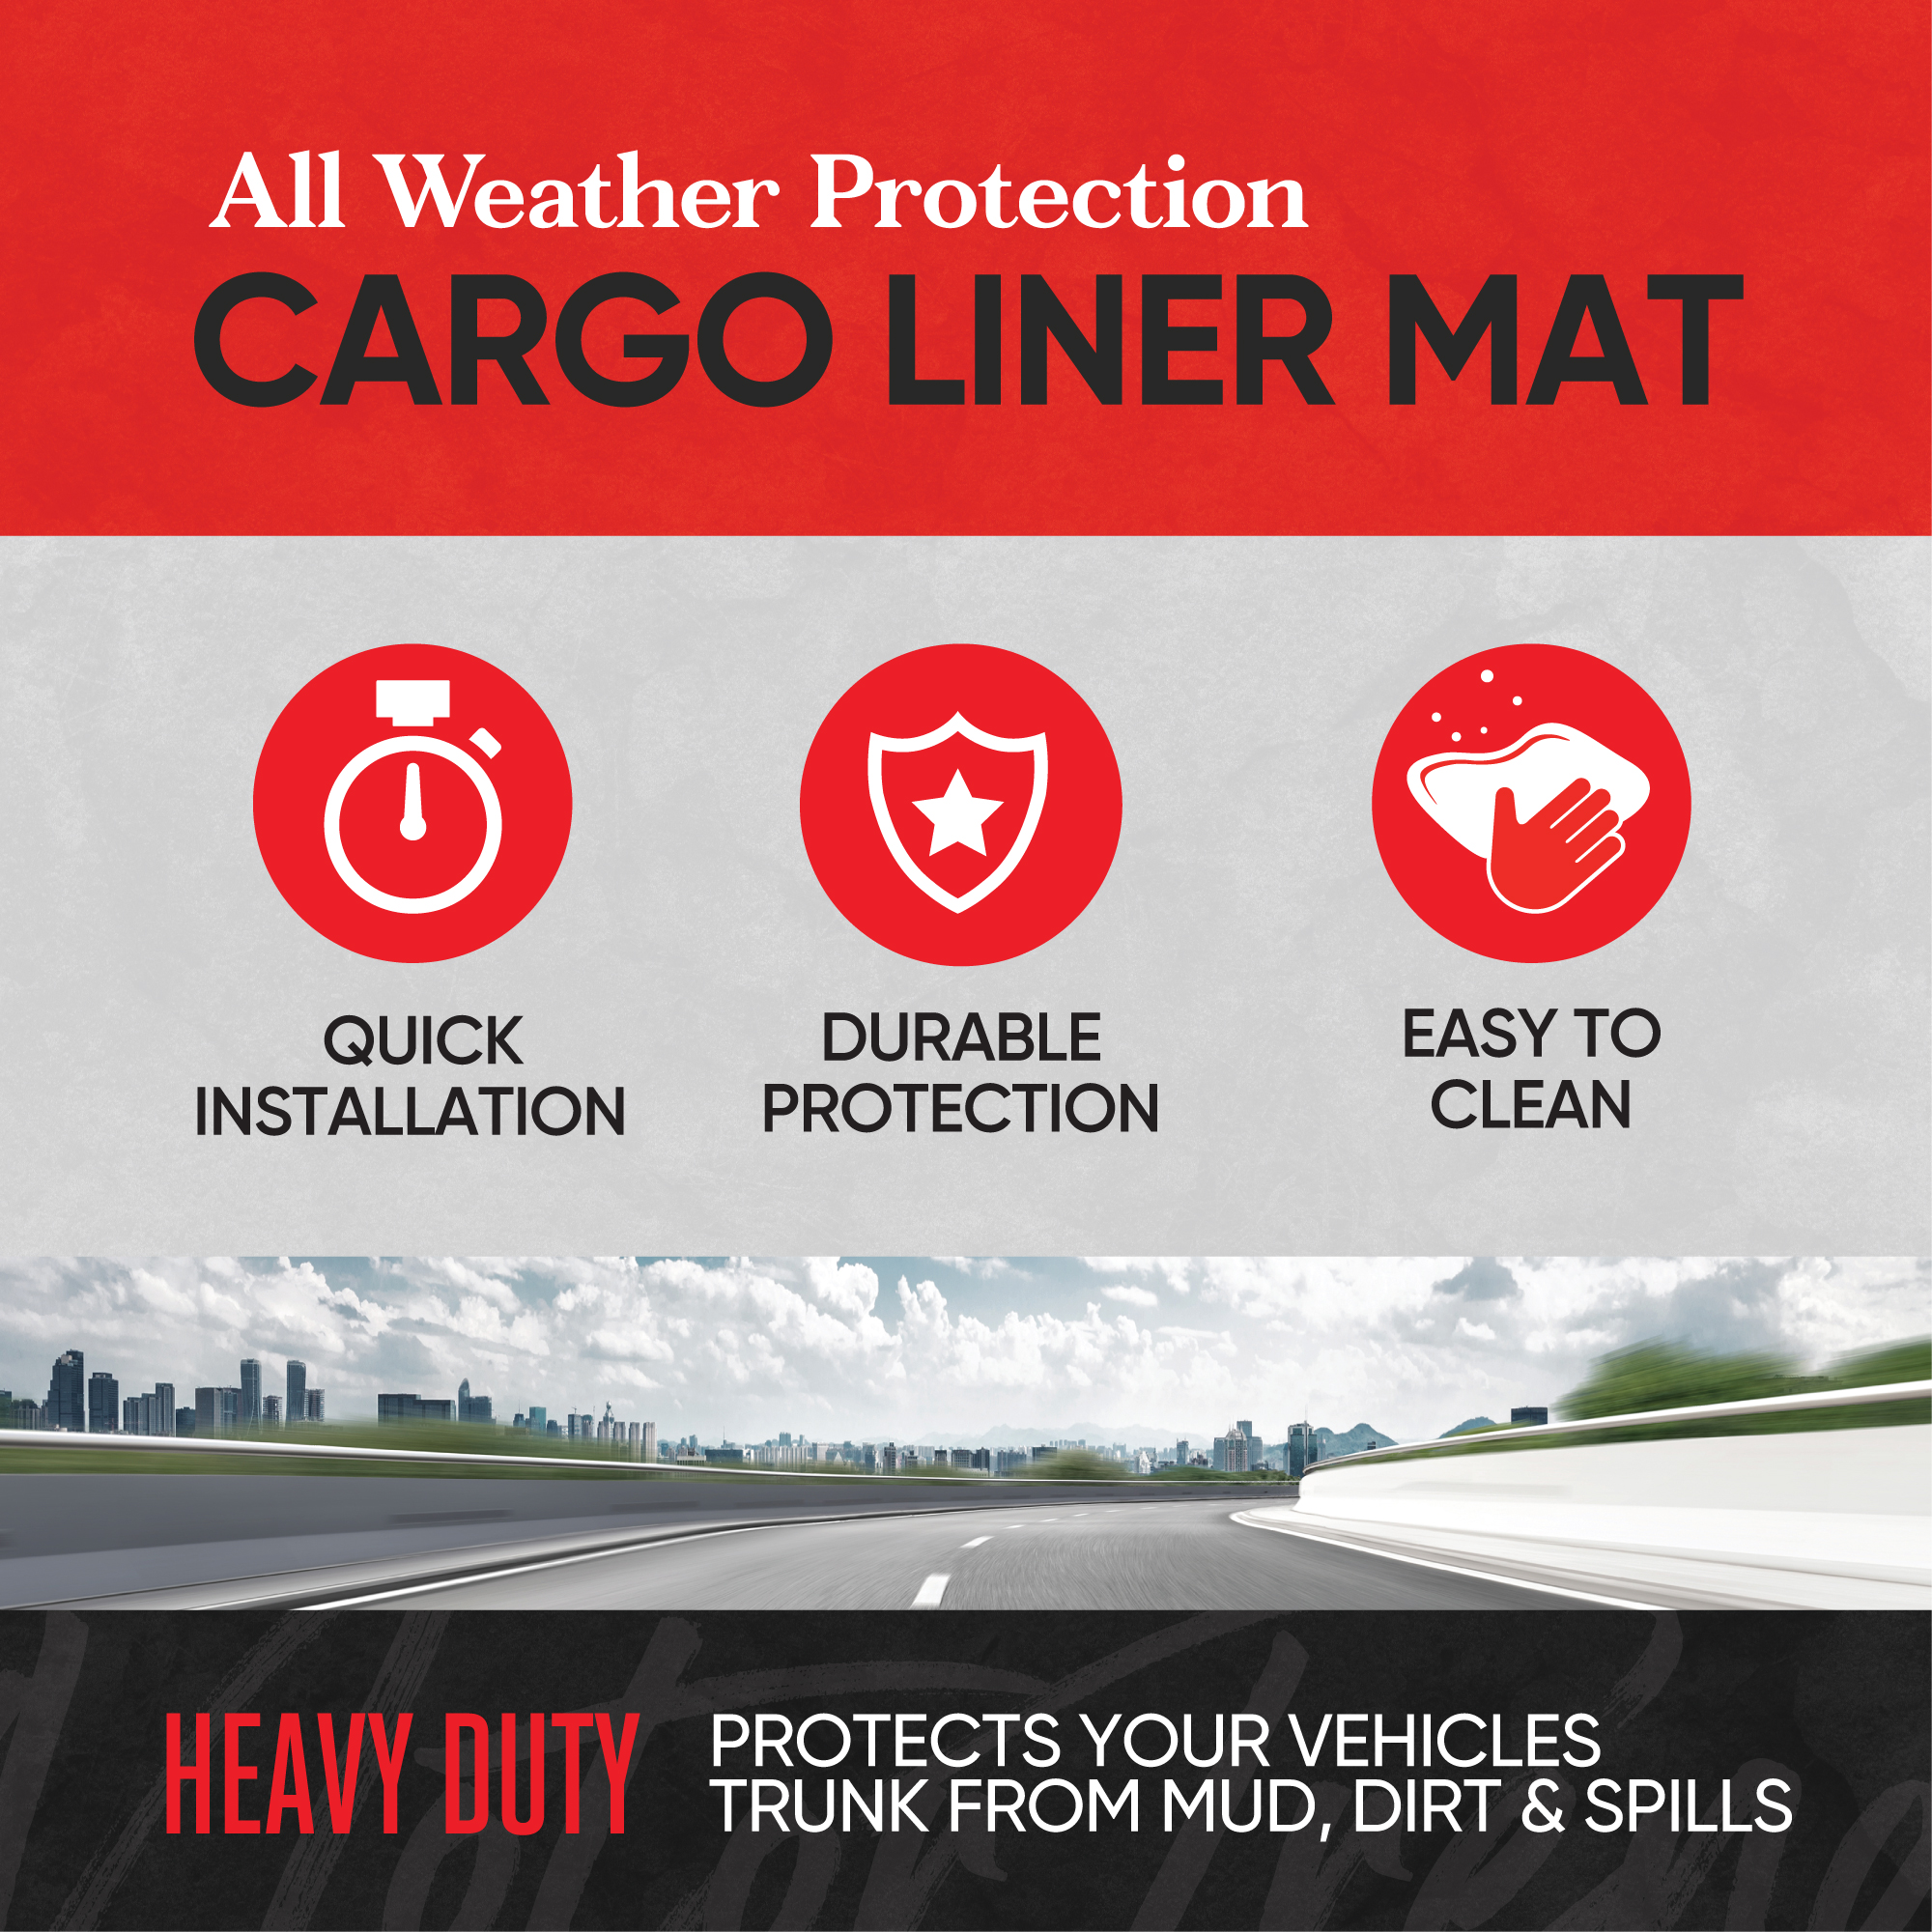 Motor Trend Heavy Duty Utility Cargo Liner Floor Mat, Trimmable to Fit Trunk, All Weather Protection - image 2 of 7